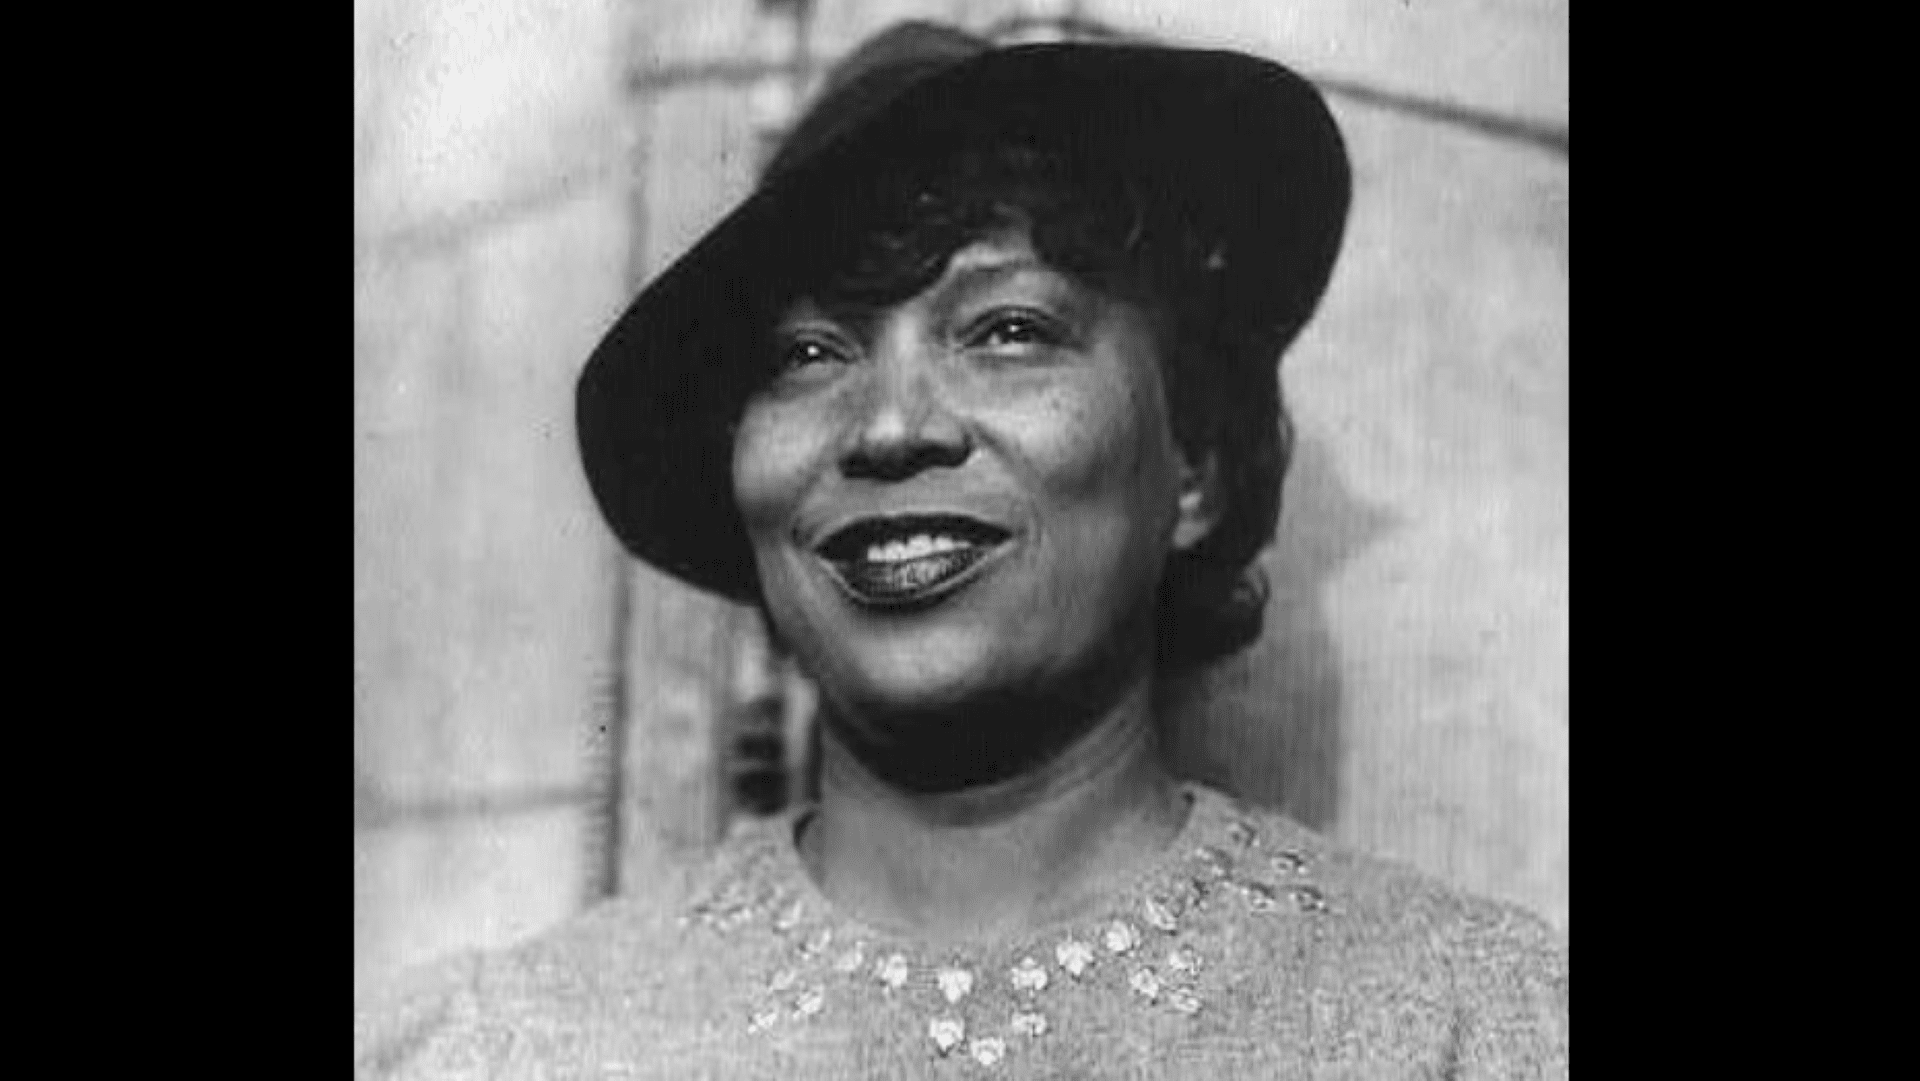 Within and beyond her literature, Zora Neale Hurston was an outspoken anti-communist who opposed both the New Deal and interventionism abroad